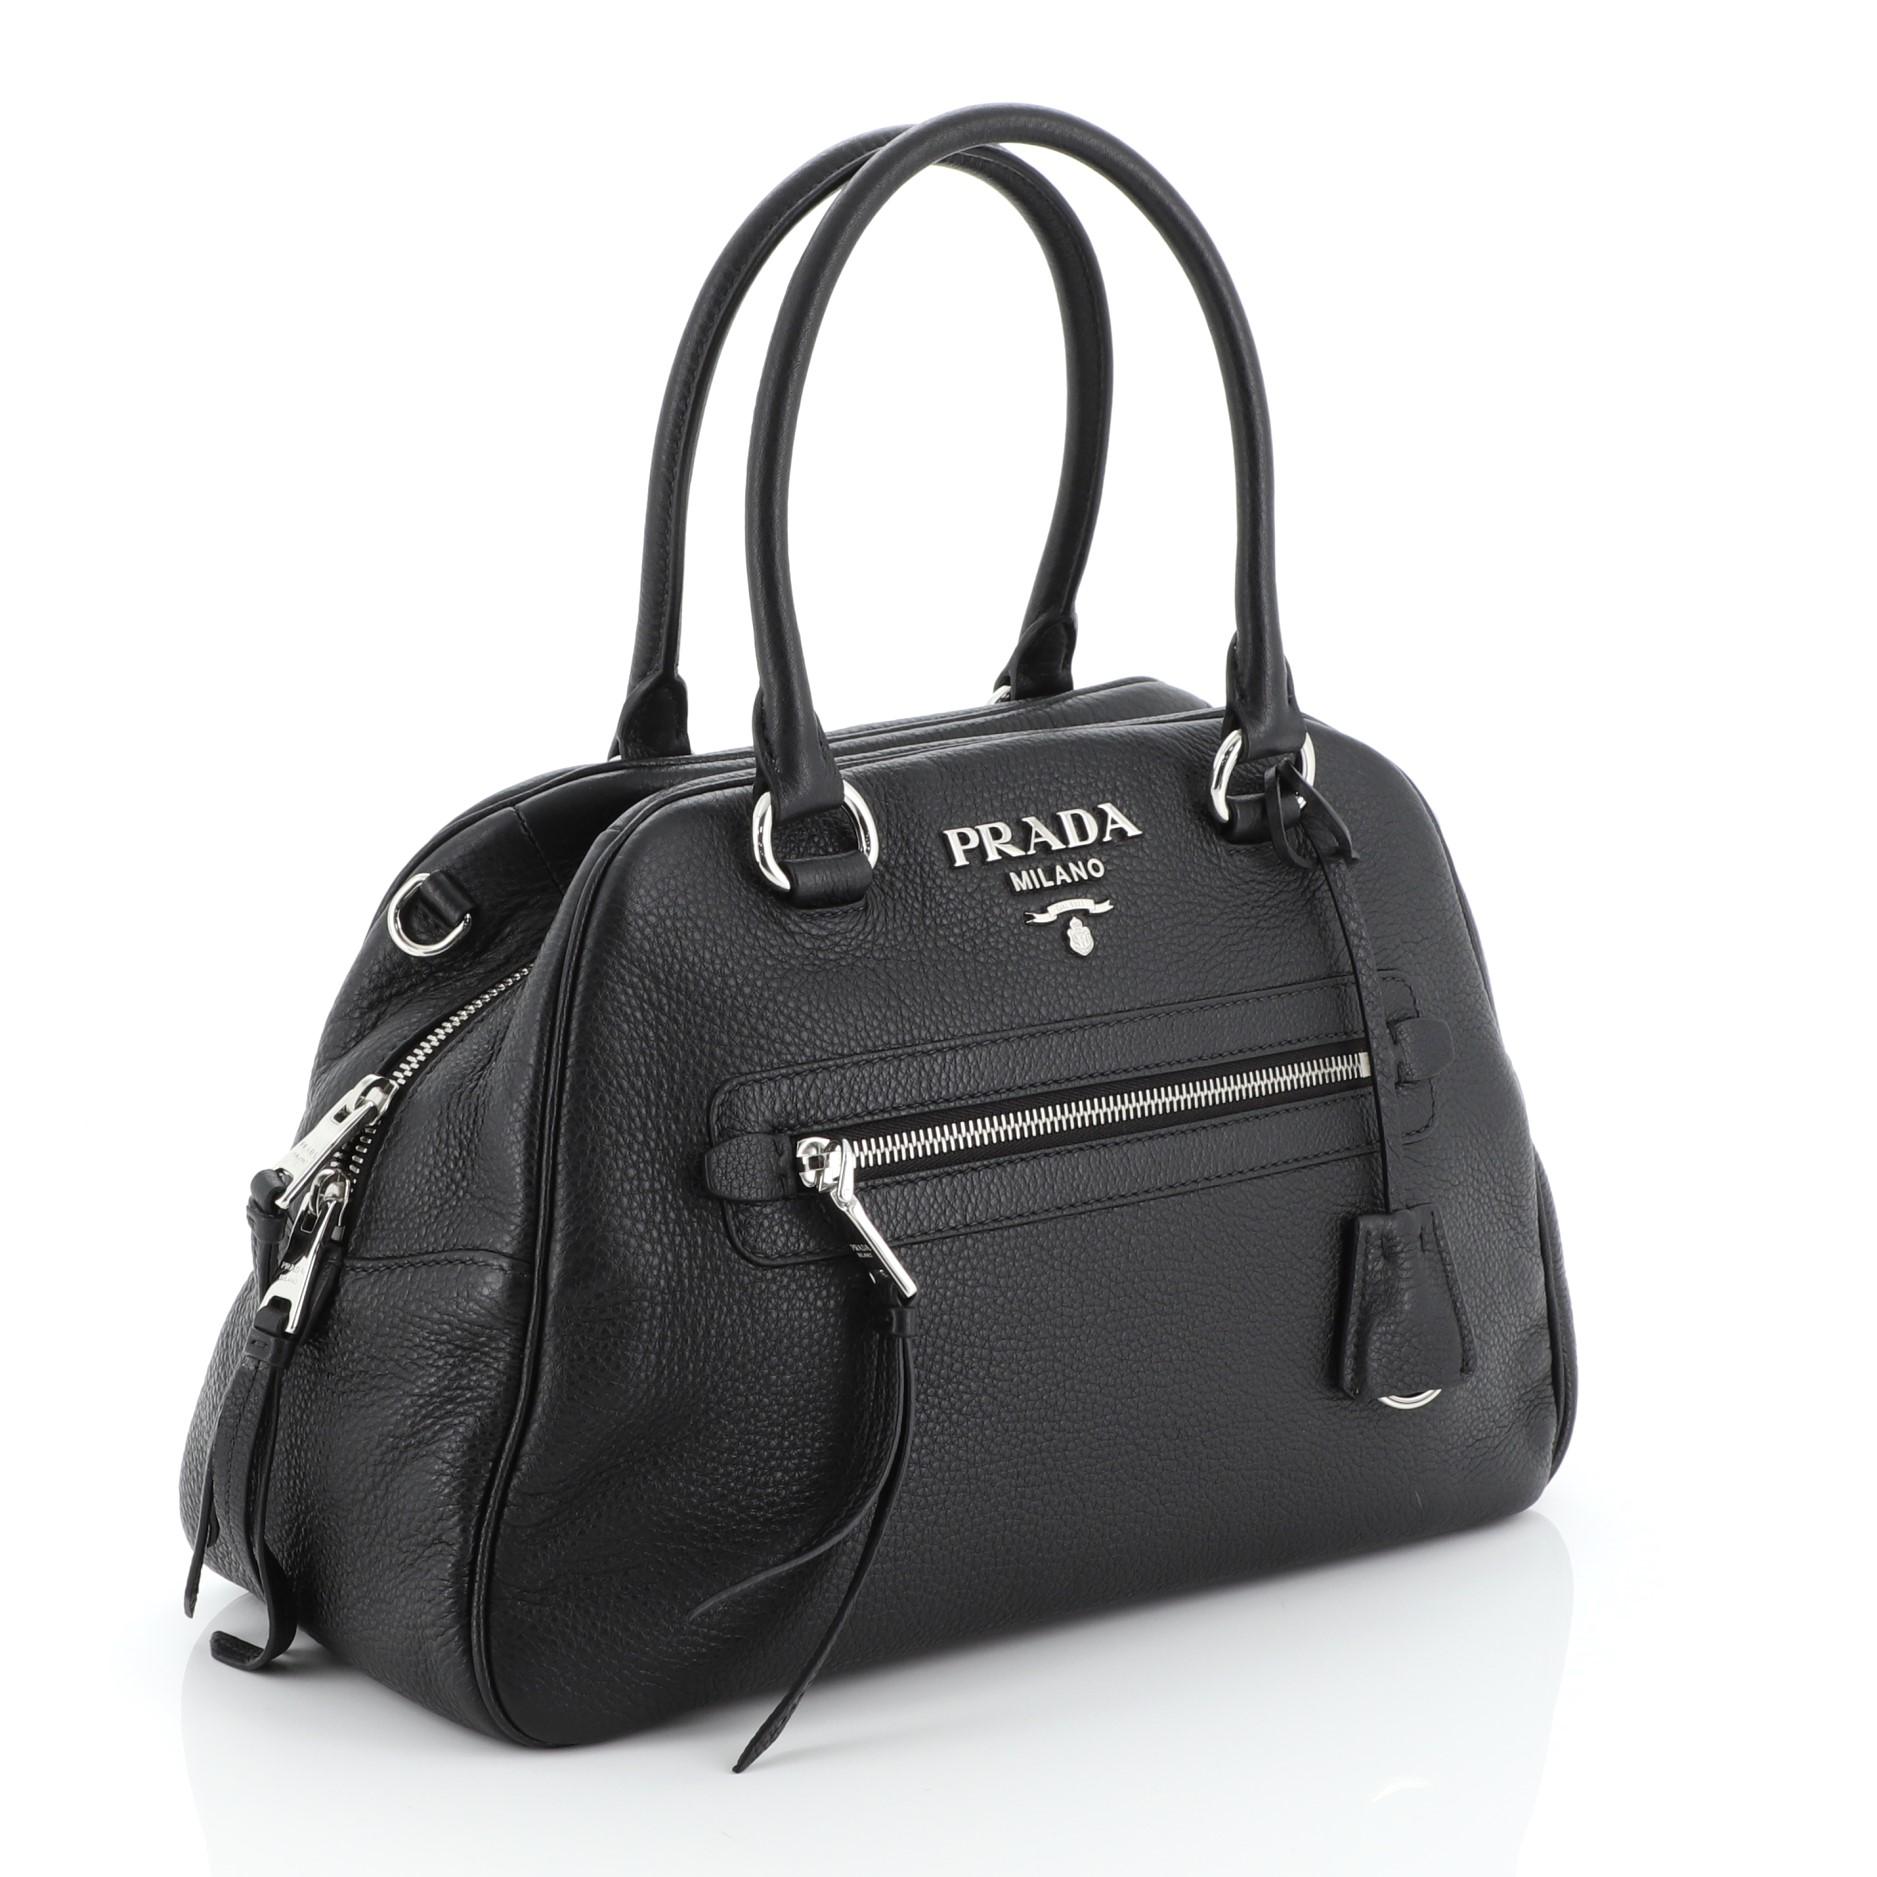 This Prada Convertible Bowling Bag Vitello Daino Medium, crafted in black vitello daino leather, features dual rolled handles, Prada logo at the center, and silver-tone hardware. Its zip closure opens to a black fabric interior with side zip and